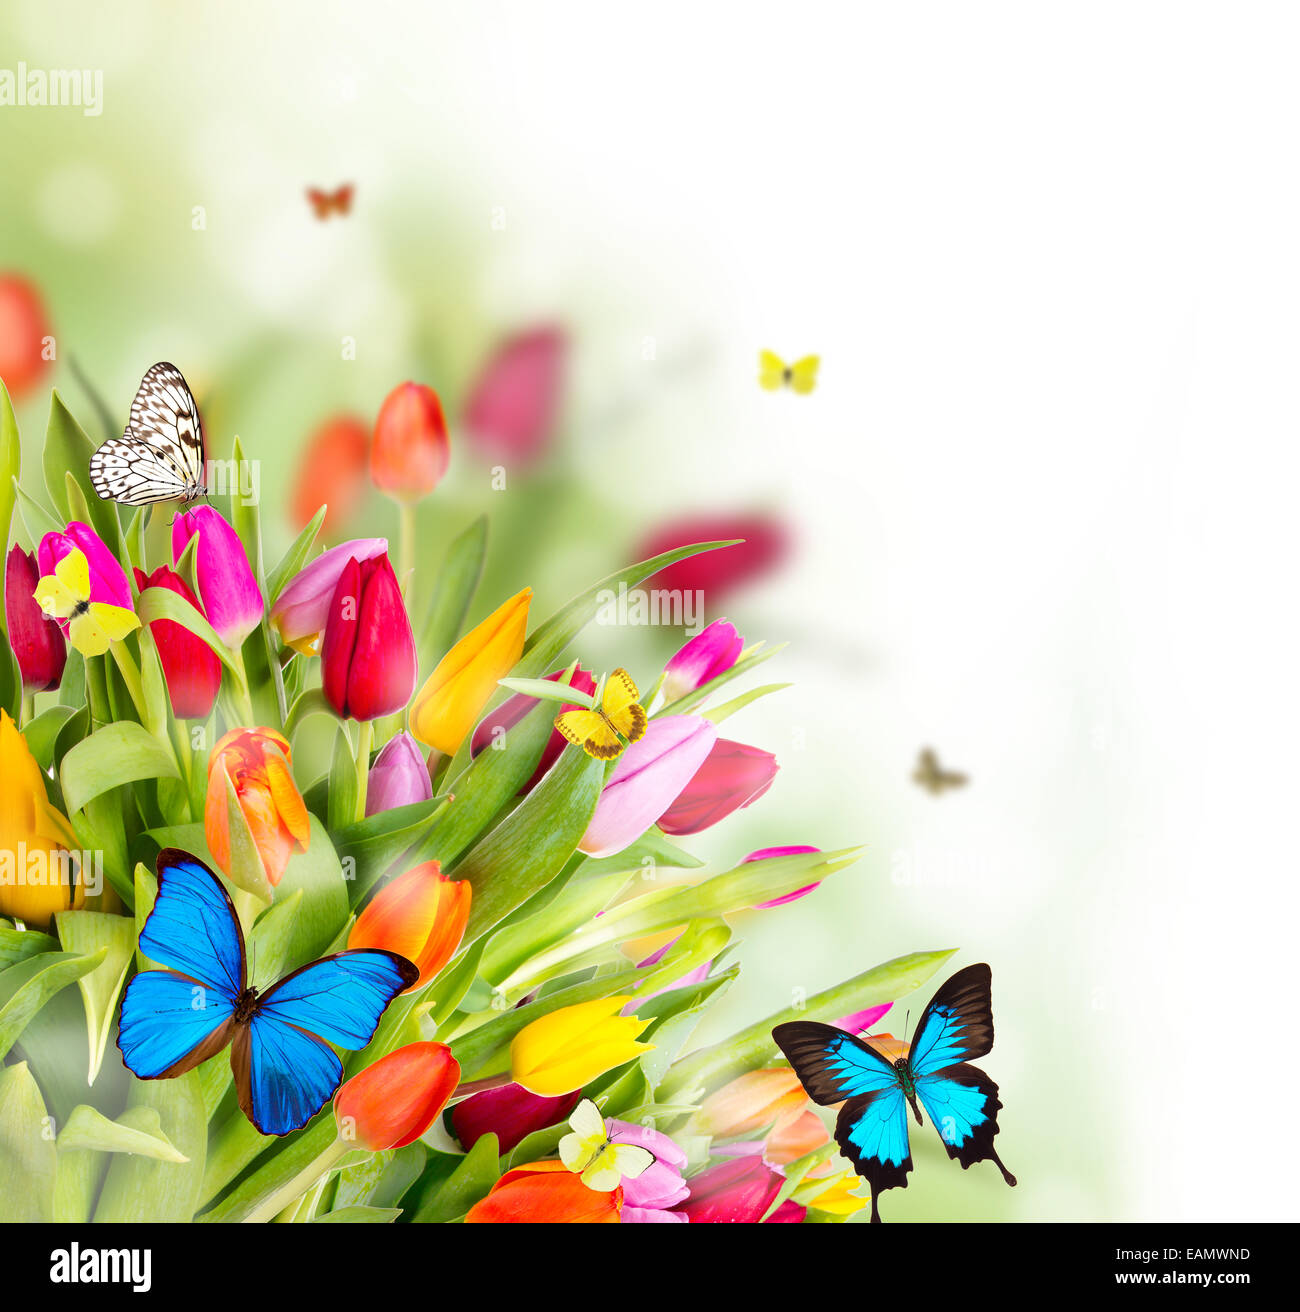 Beautiful spring flowers with butterflies Stock Photo